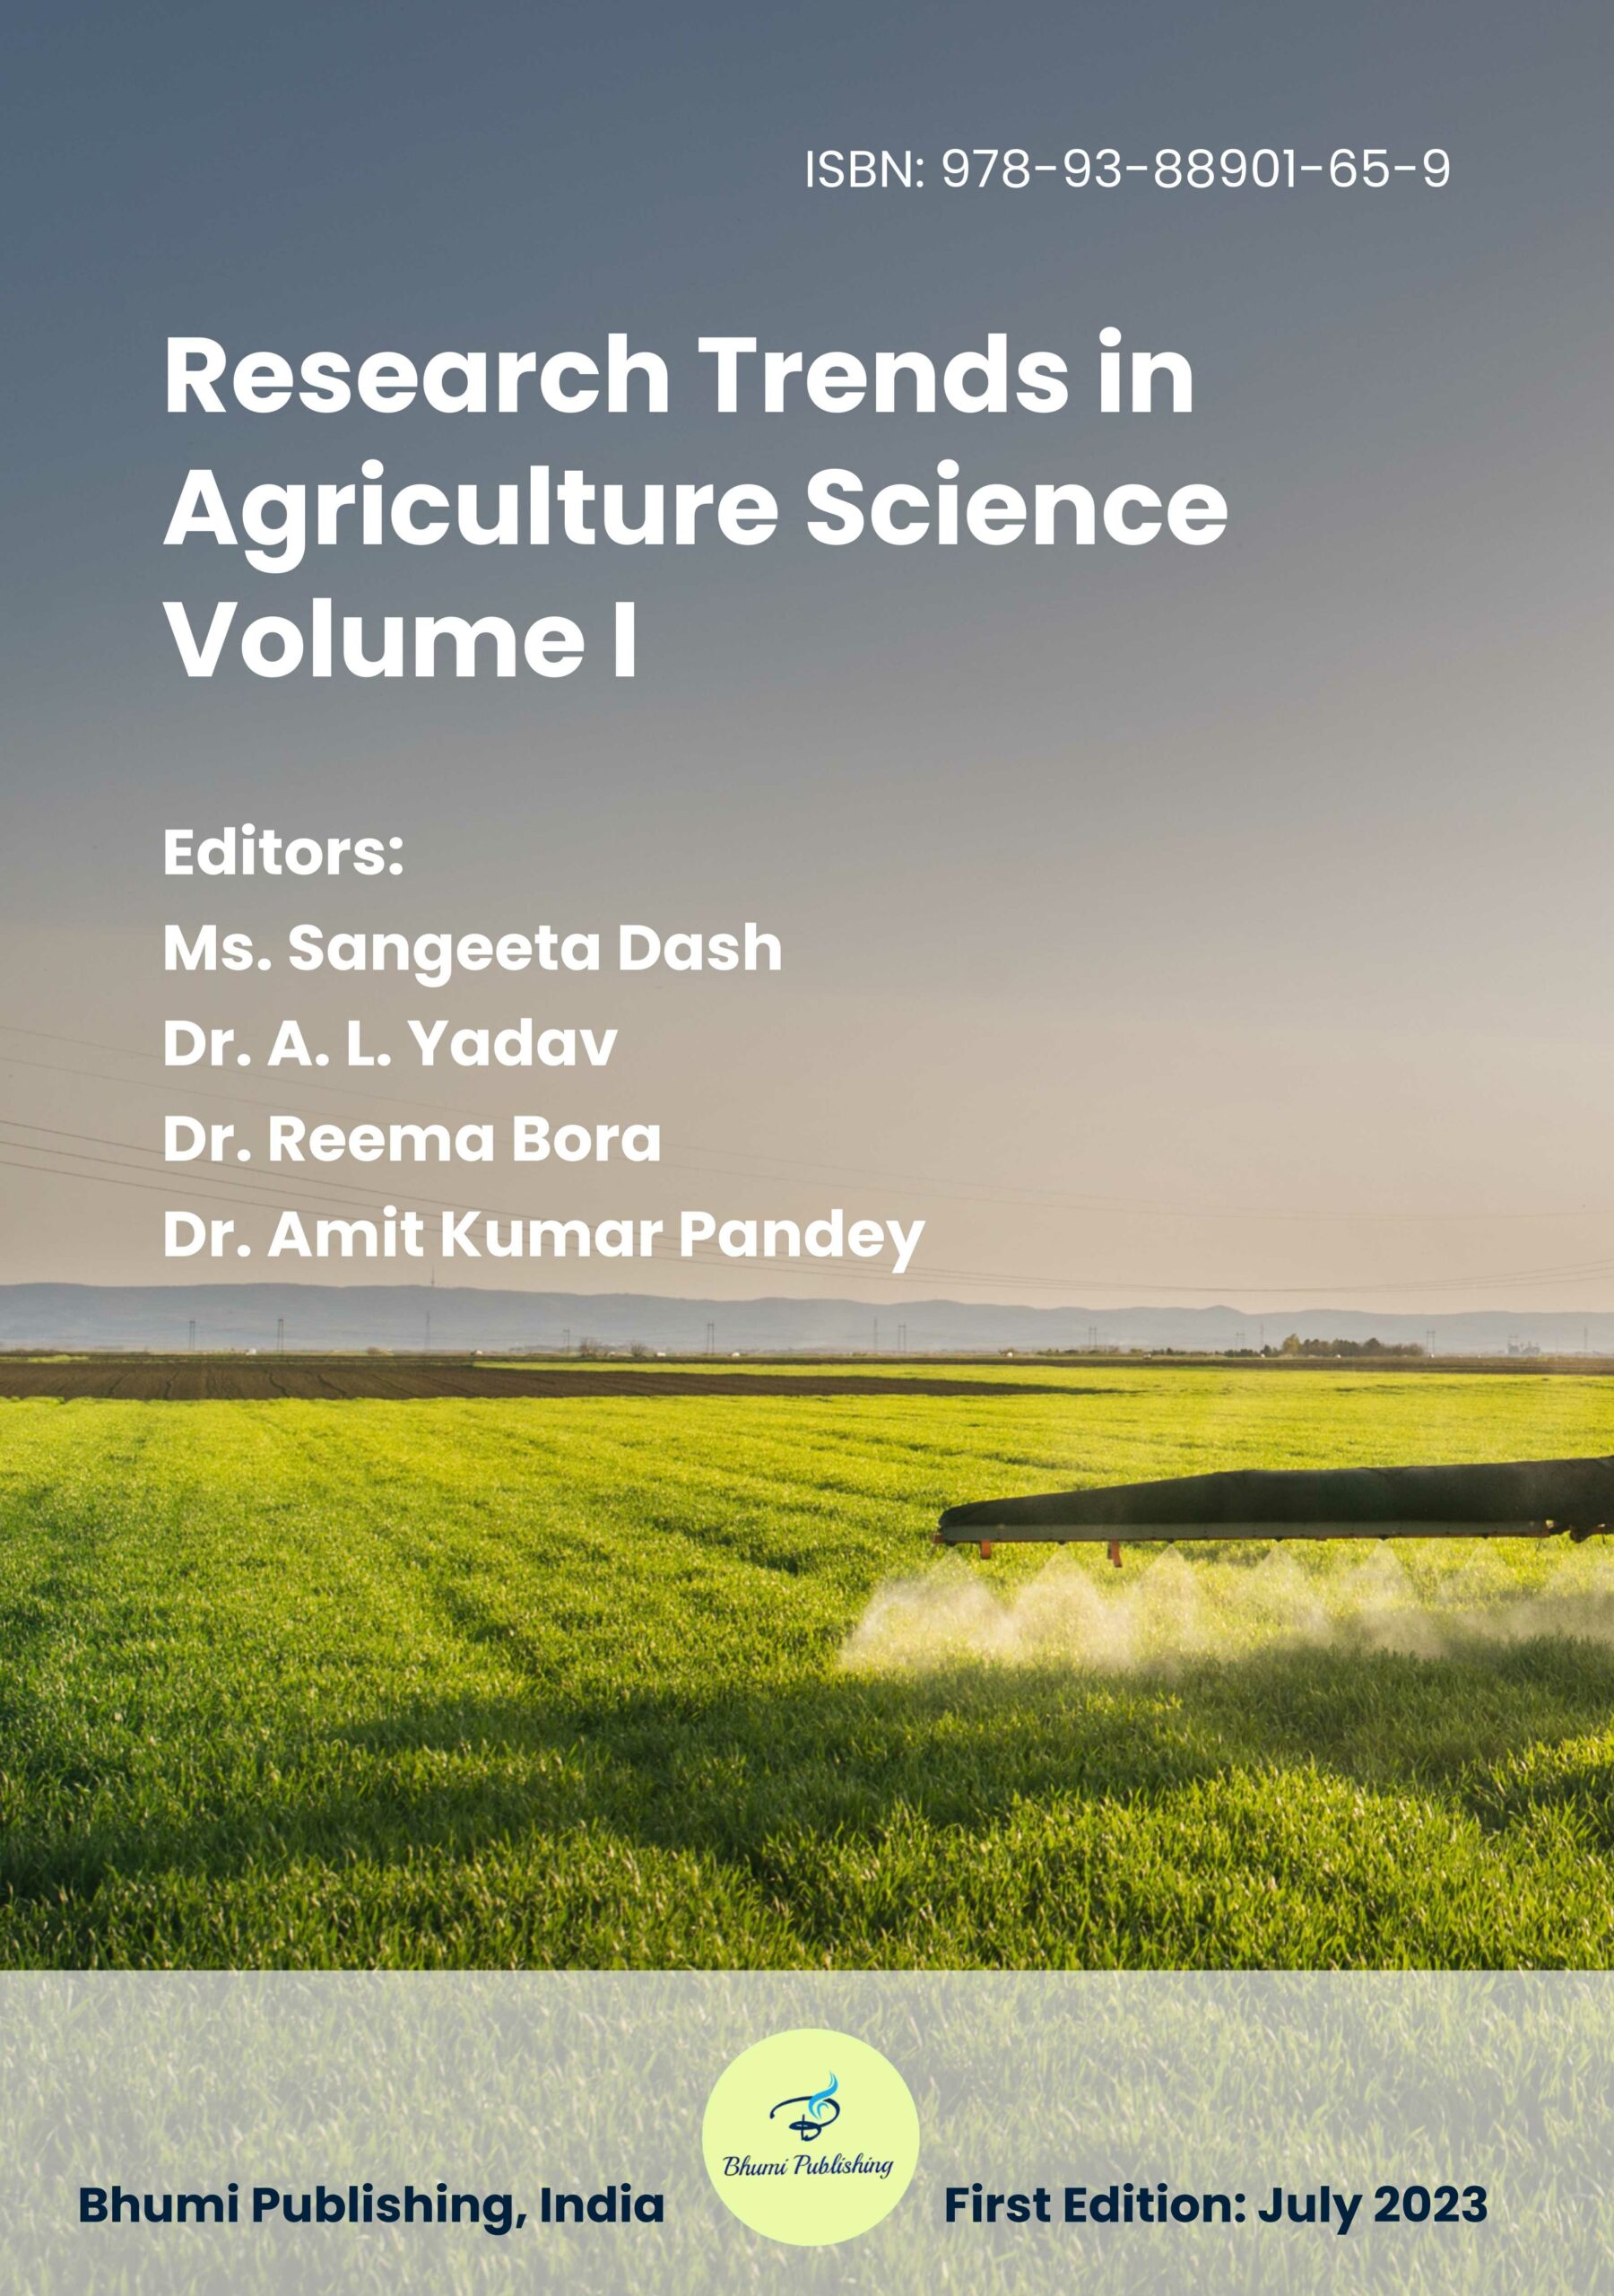 Research Trends in Agriculture Science Volume I